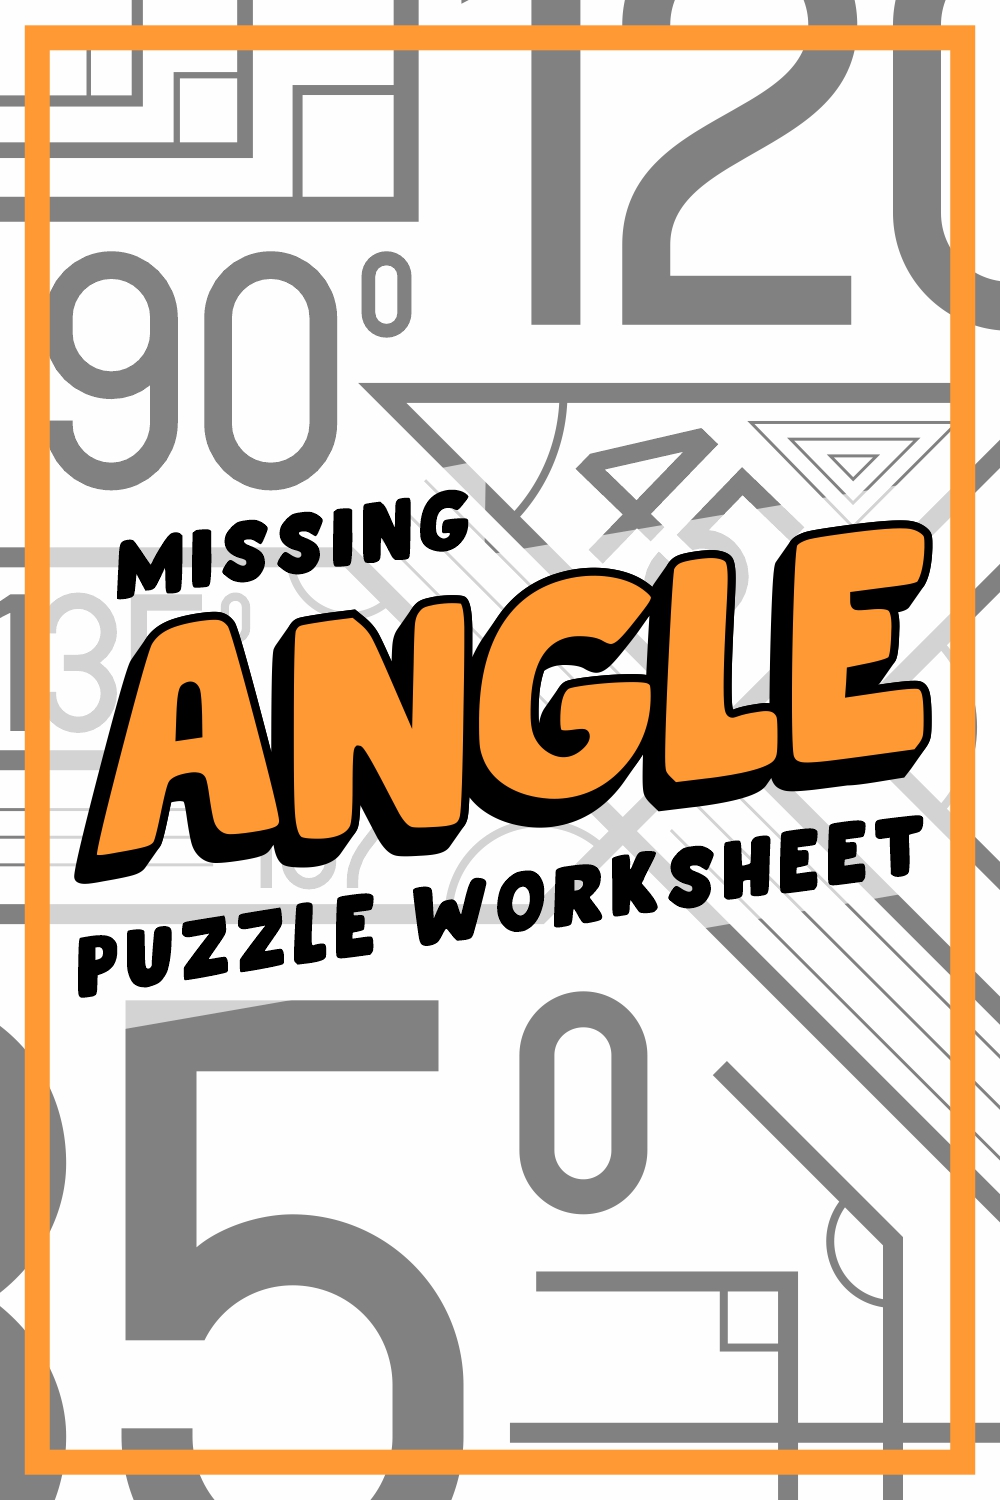 18 Images of Missing Angle Puzzle Worksheet